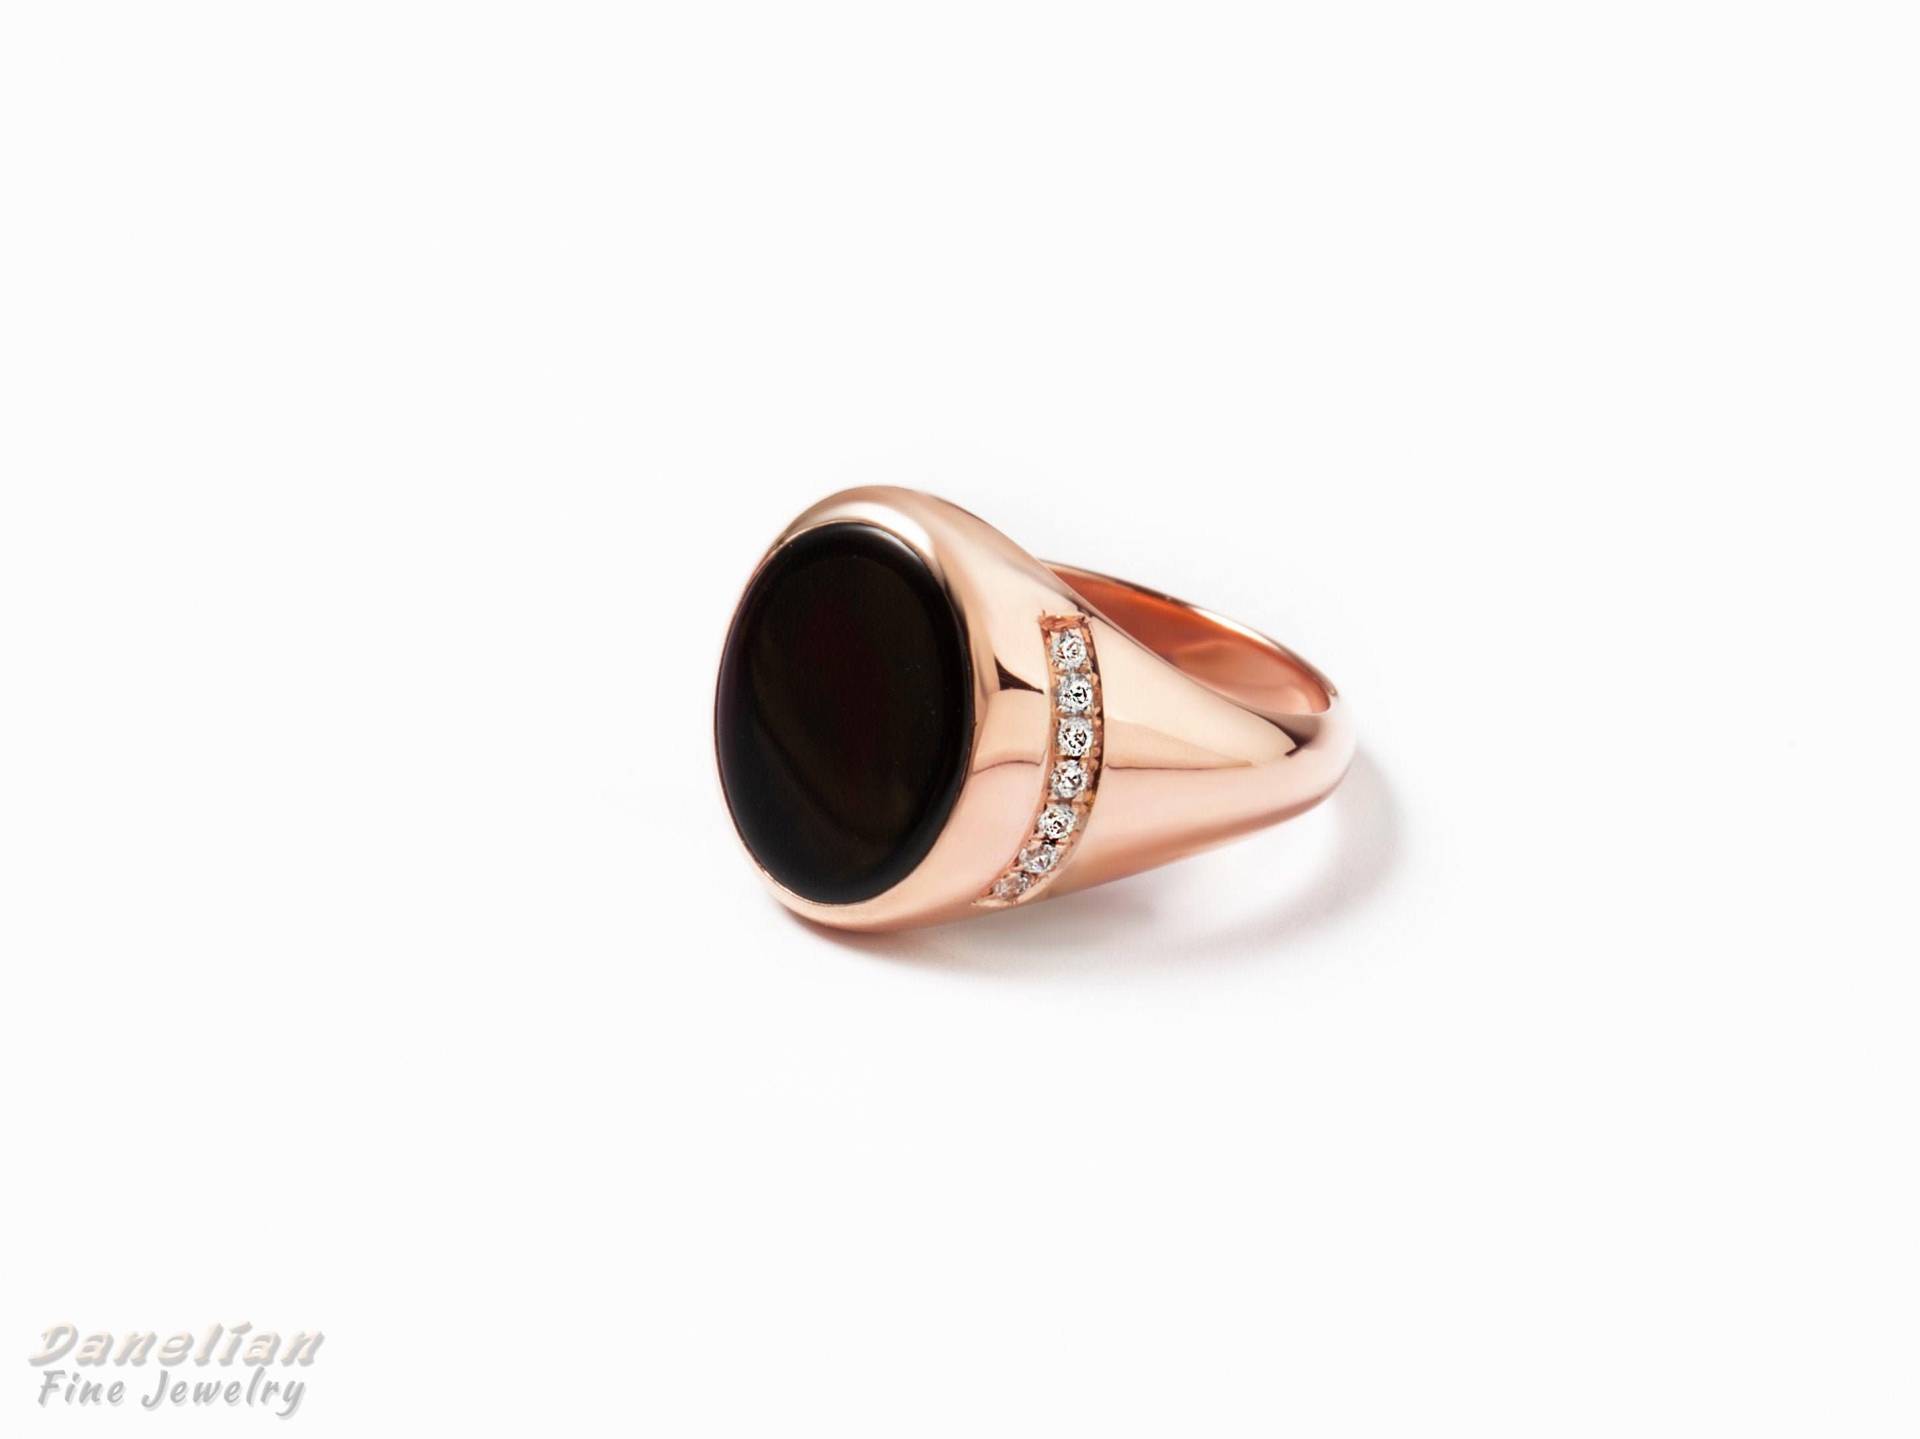 14K Gold Pinky Ring, Diamant Siegelring, Solid Onyx Rosegold Ring von DanelianJewelry